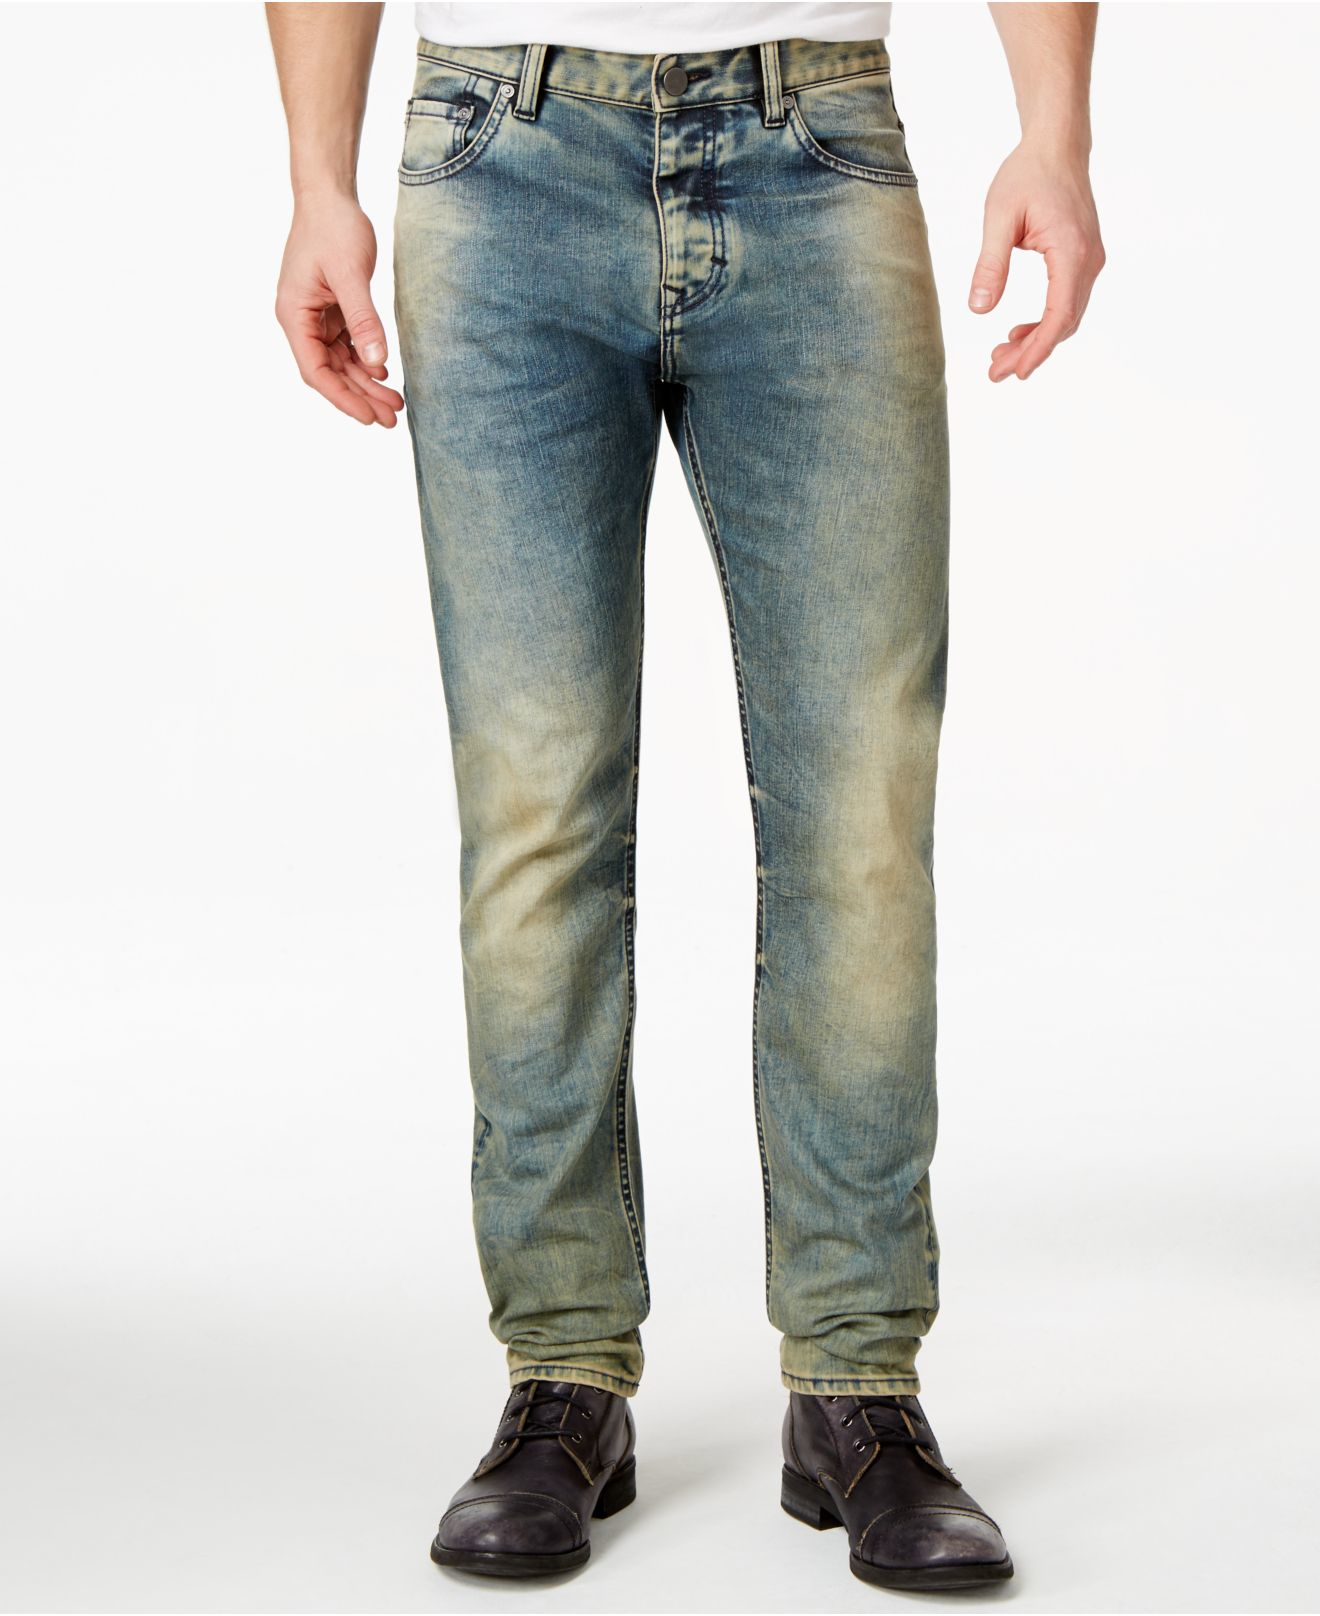 Lyst - Calvin Klein Jeans Slim-straight Fit Jeans in Blue for Men